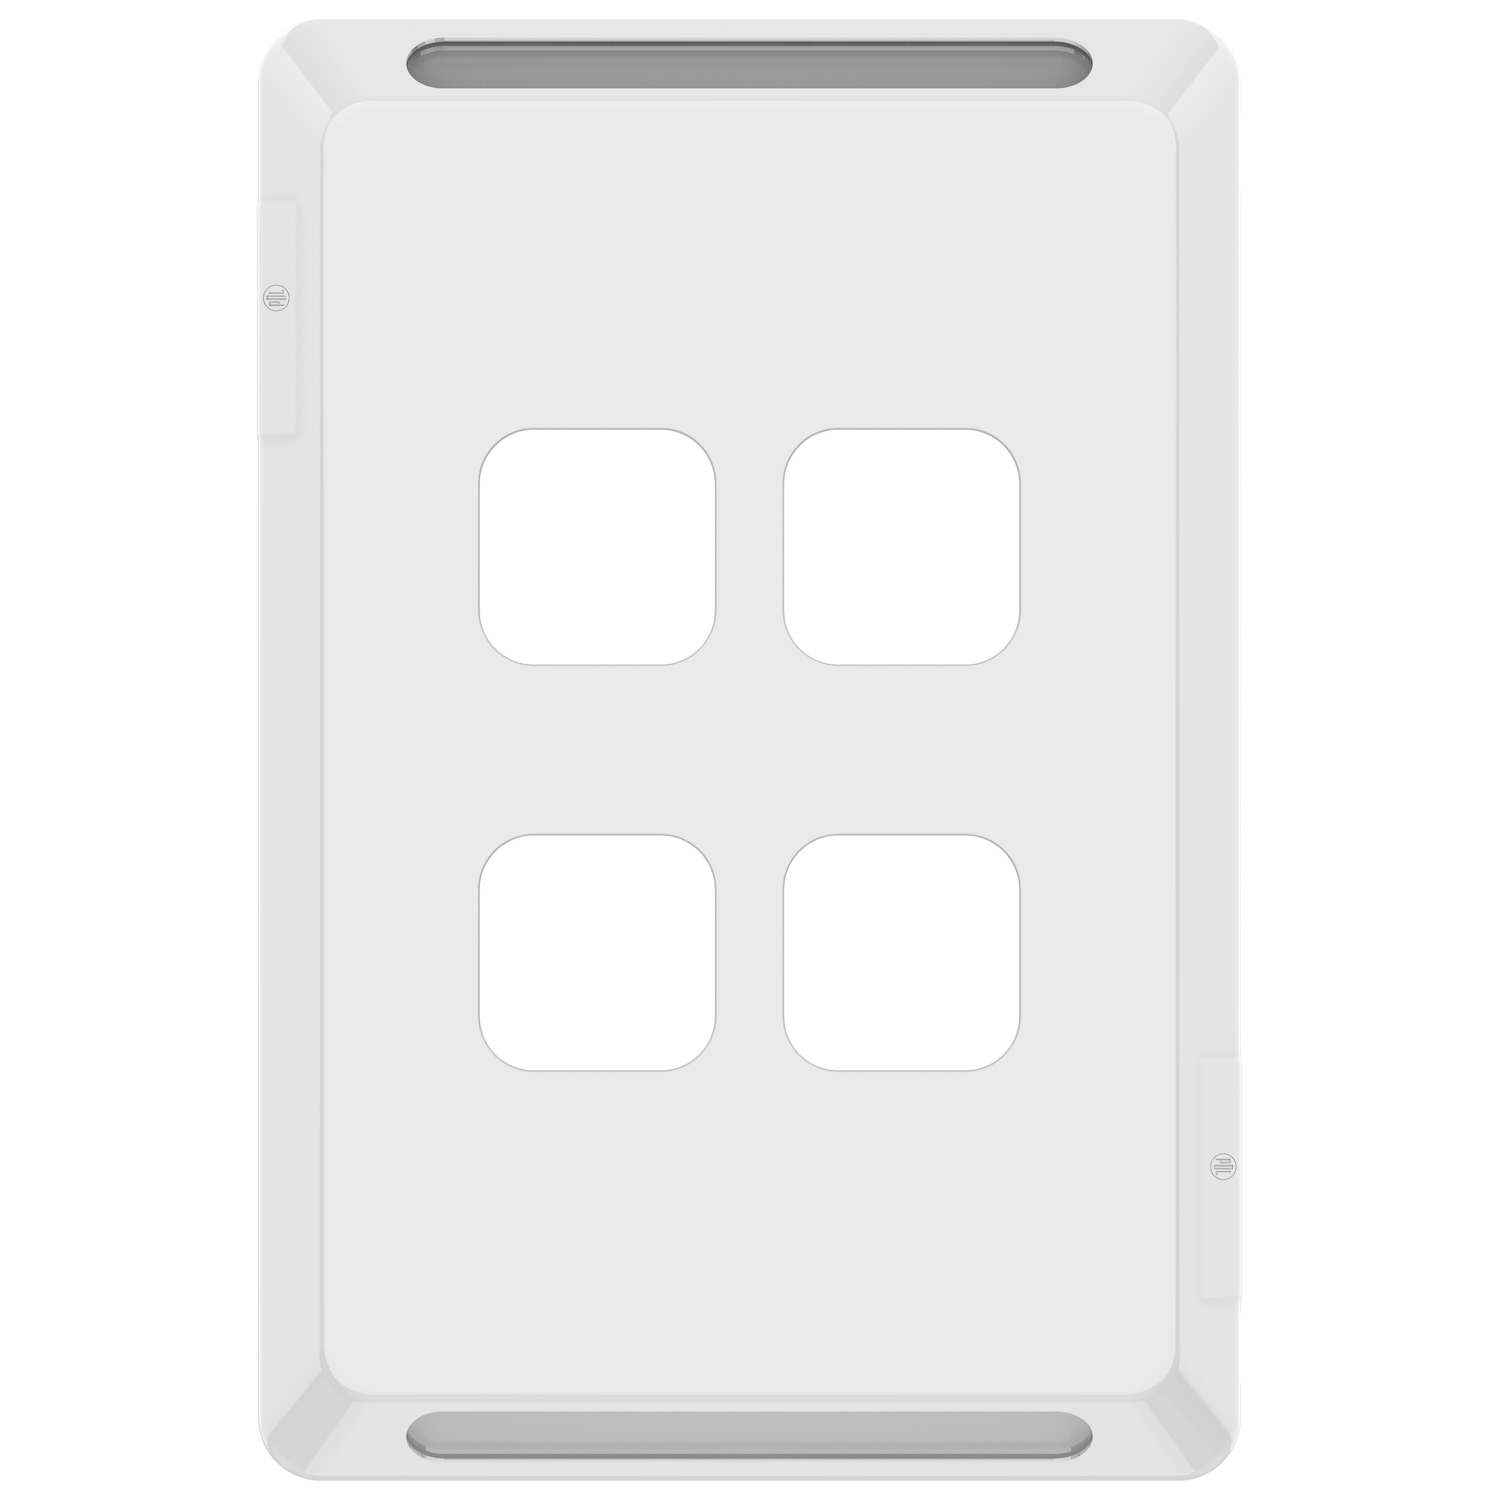 PDL Pro Series - Grid + Cover Plate Switch 4-Gang - White